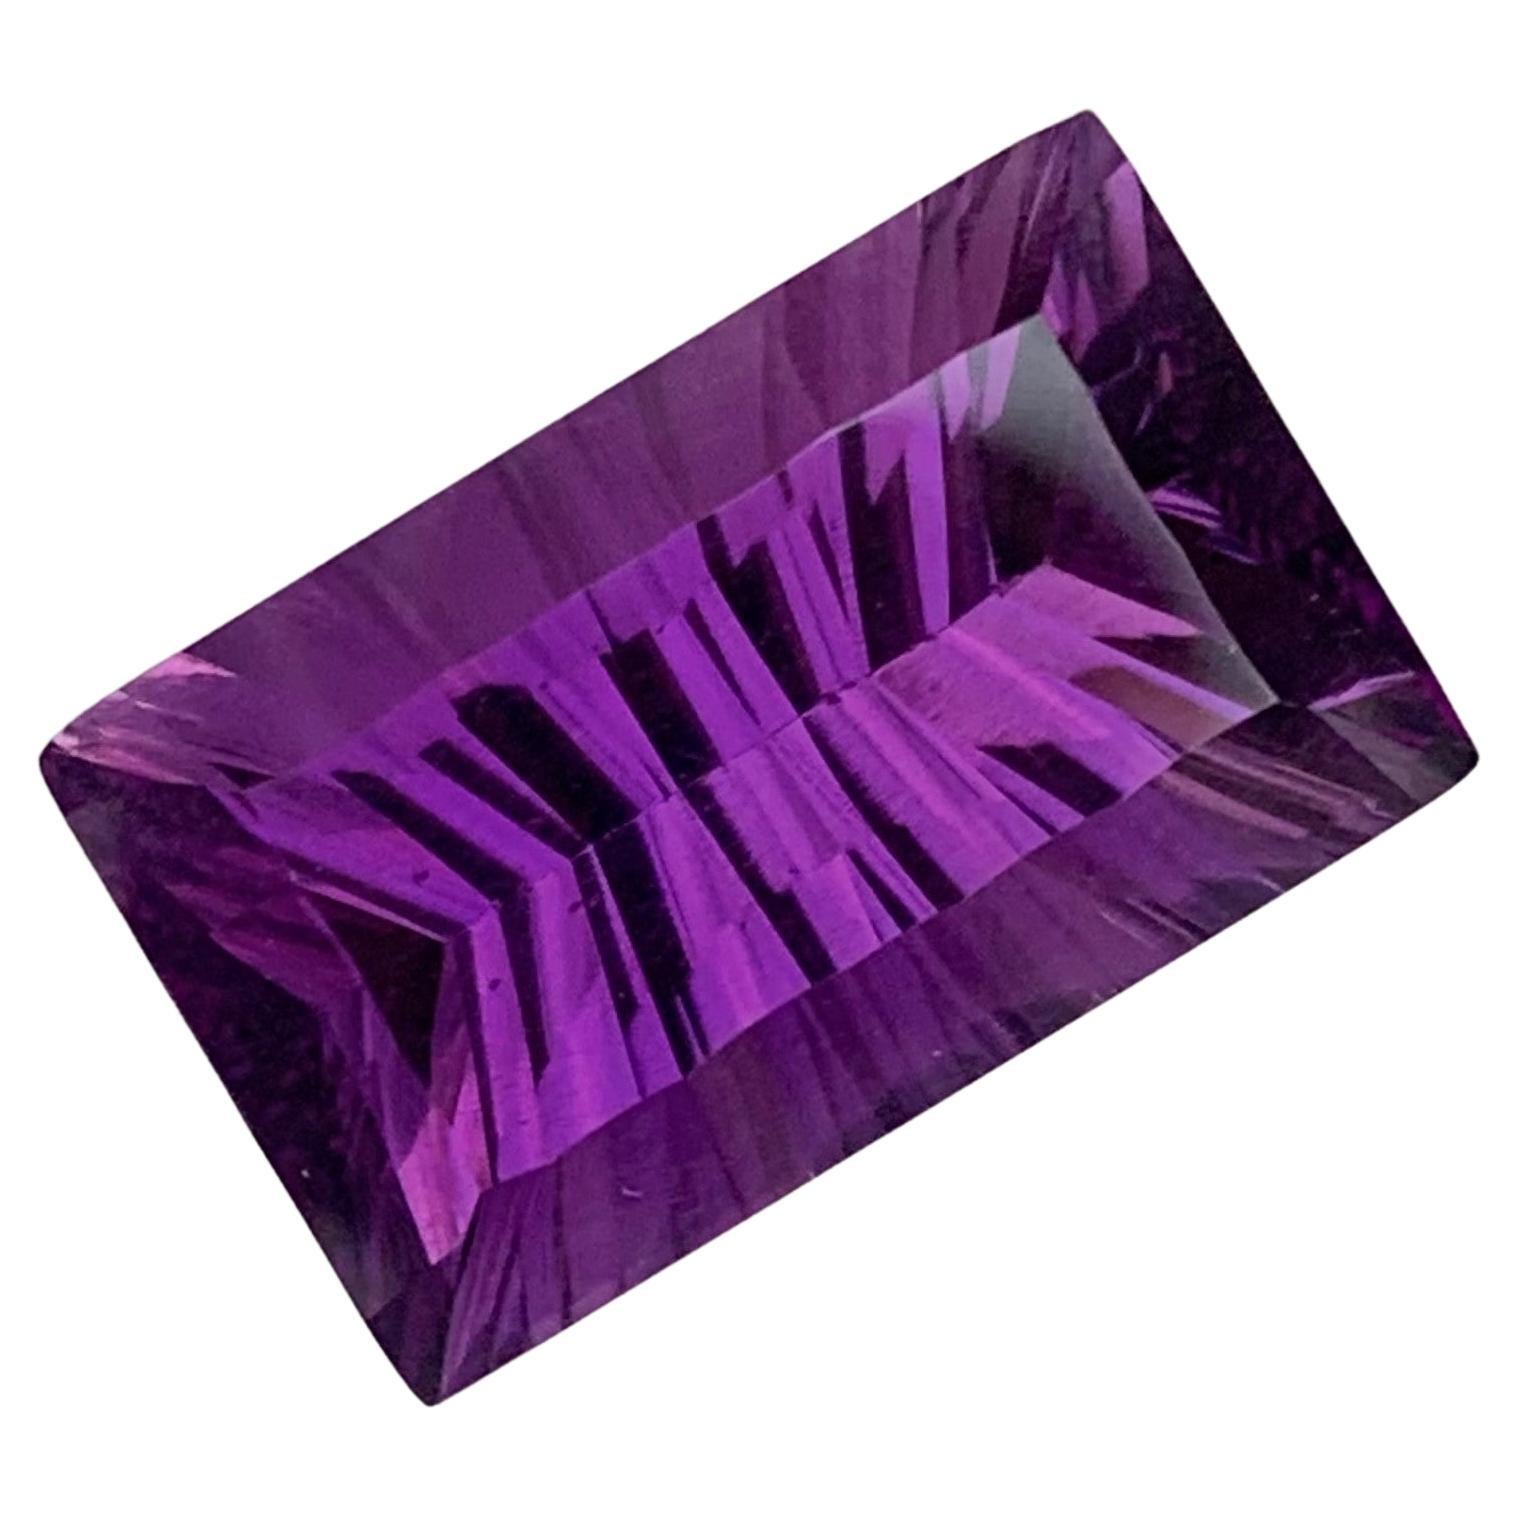 10.35 Carat Laser Cut Faceted Amethyst Gemstone Available For Sale  For Sale